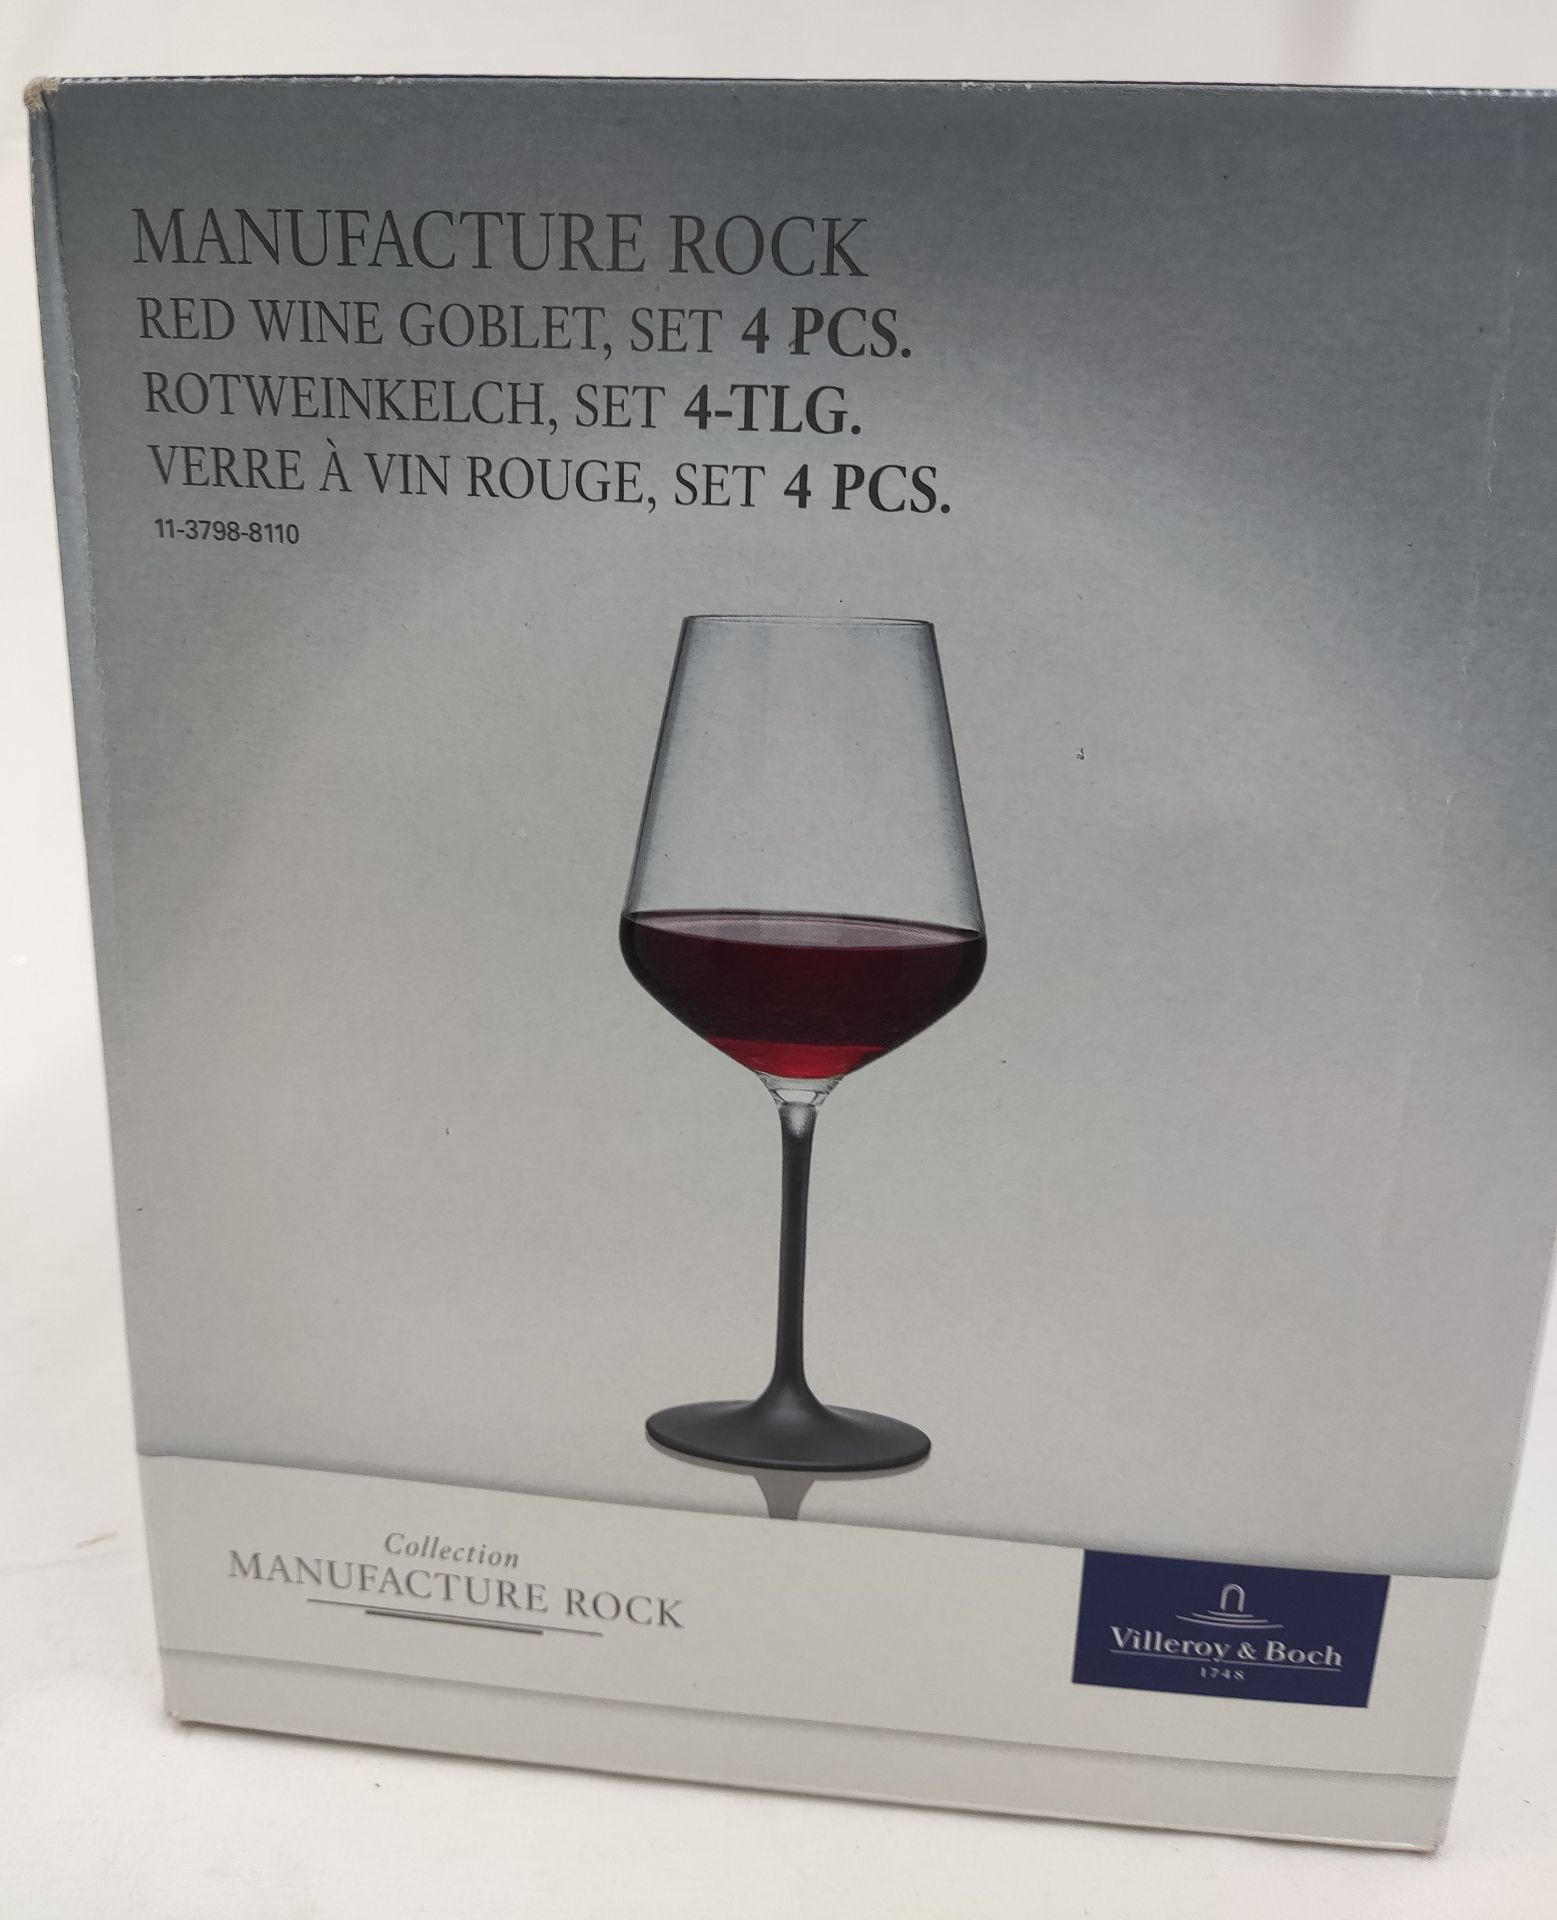 1 x VILLEROY & BOCH Manufacture Rock Red Wine Goblet Set, 4 Piece - New And Boxed - RRP £66 - Ref: - Image 6 of 12